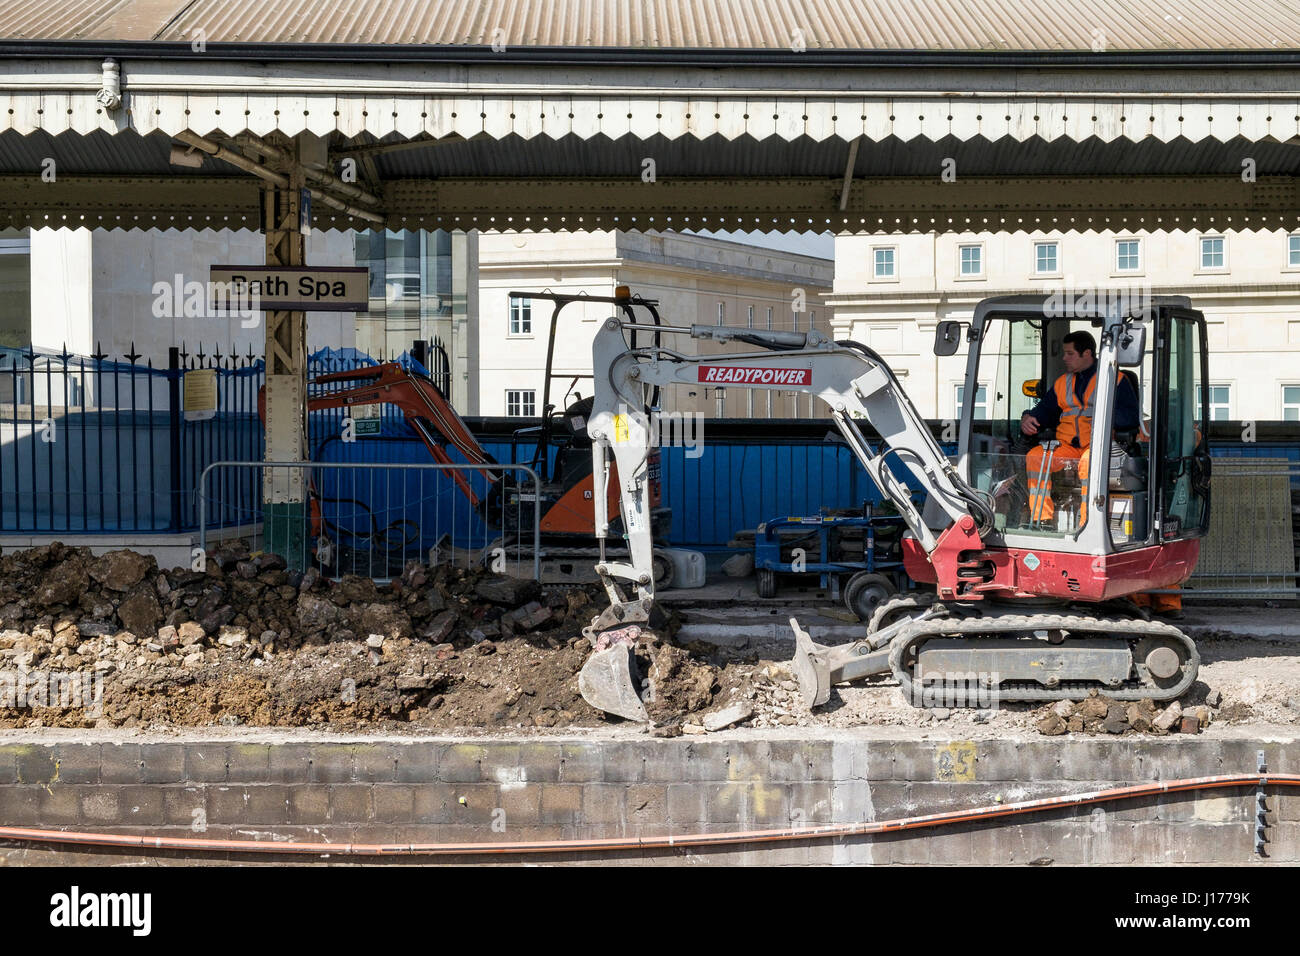 Bath, UK. 18th Apr, 2017. Workers are pictured on the platform at Bath Spa railway station as they work to modernise the station in preparation for the new longer trains that are due to come into service later this year. The work included widening the platform and altering the track layout was planned to take two weeks and is due to be completed on the 23rd April. Credit: lynchpics/Alamy Live News Stock Photo